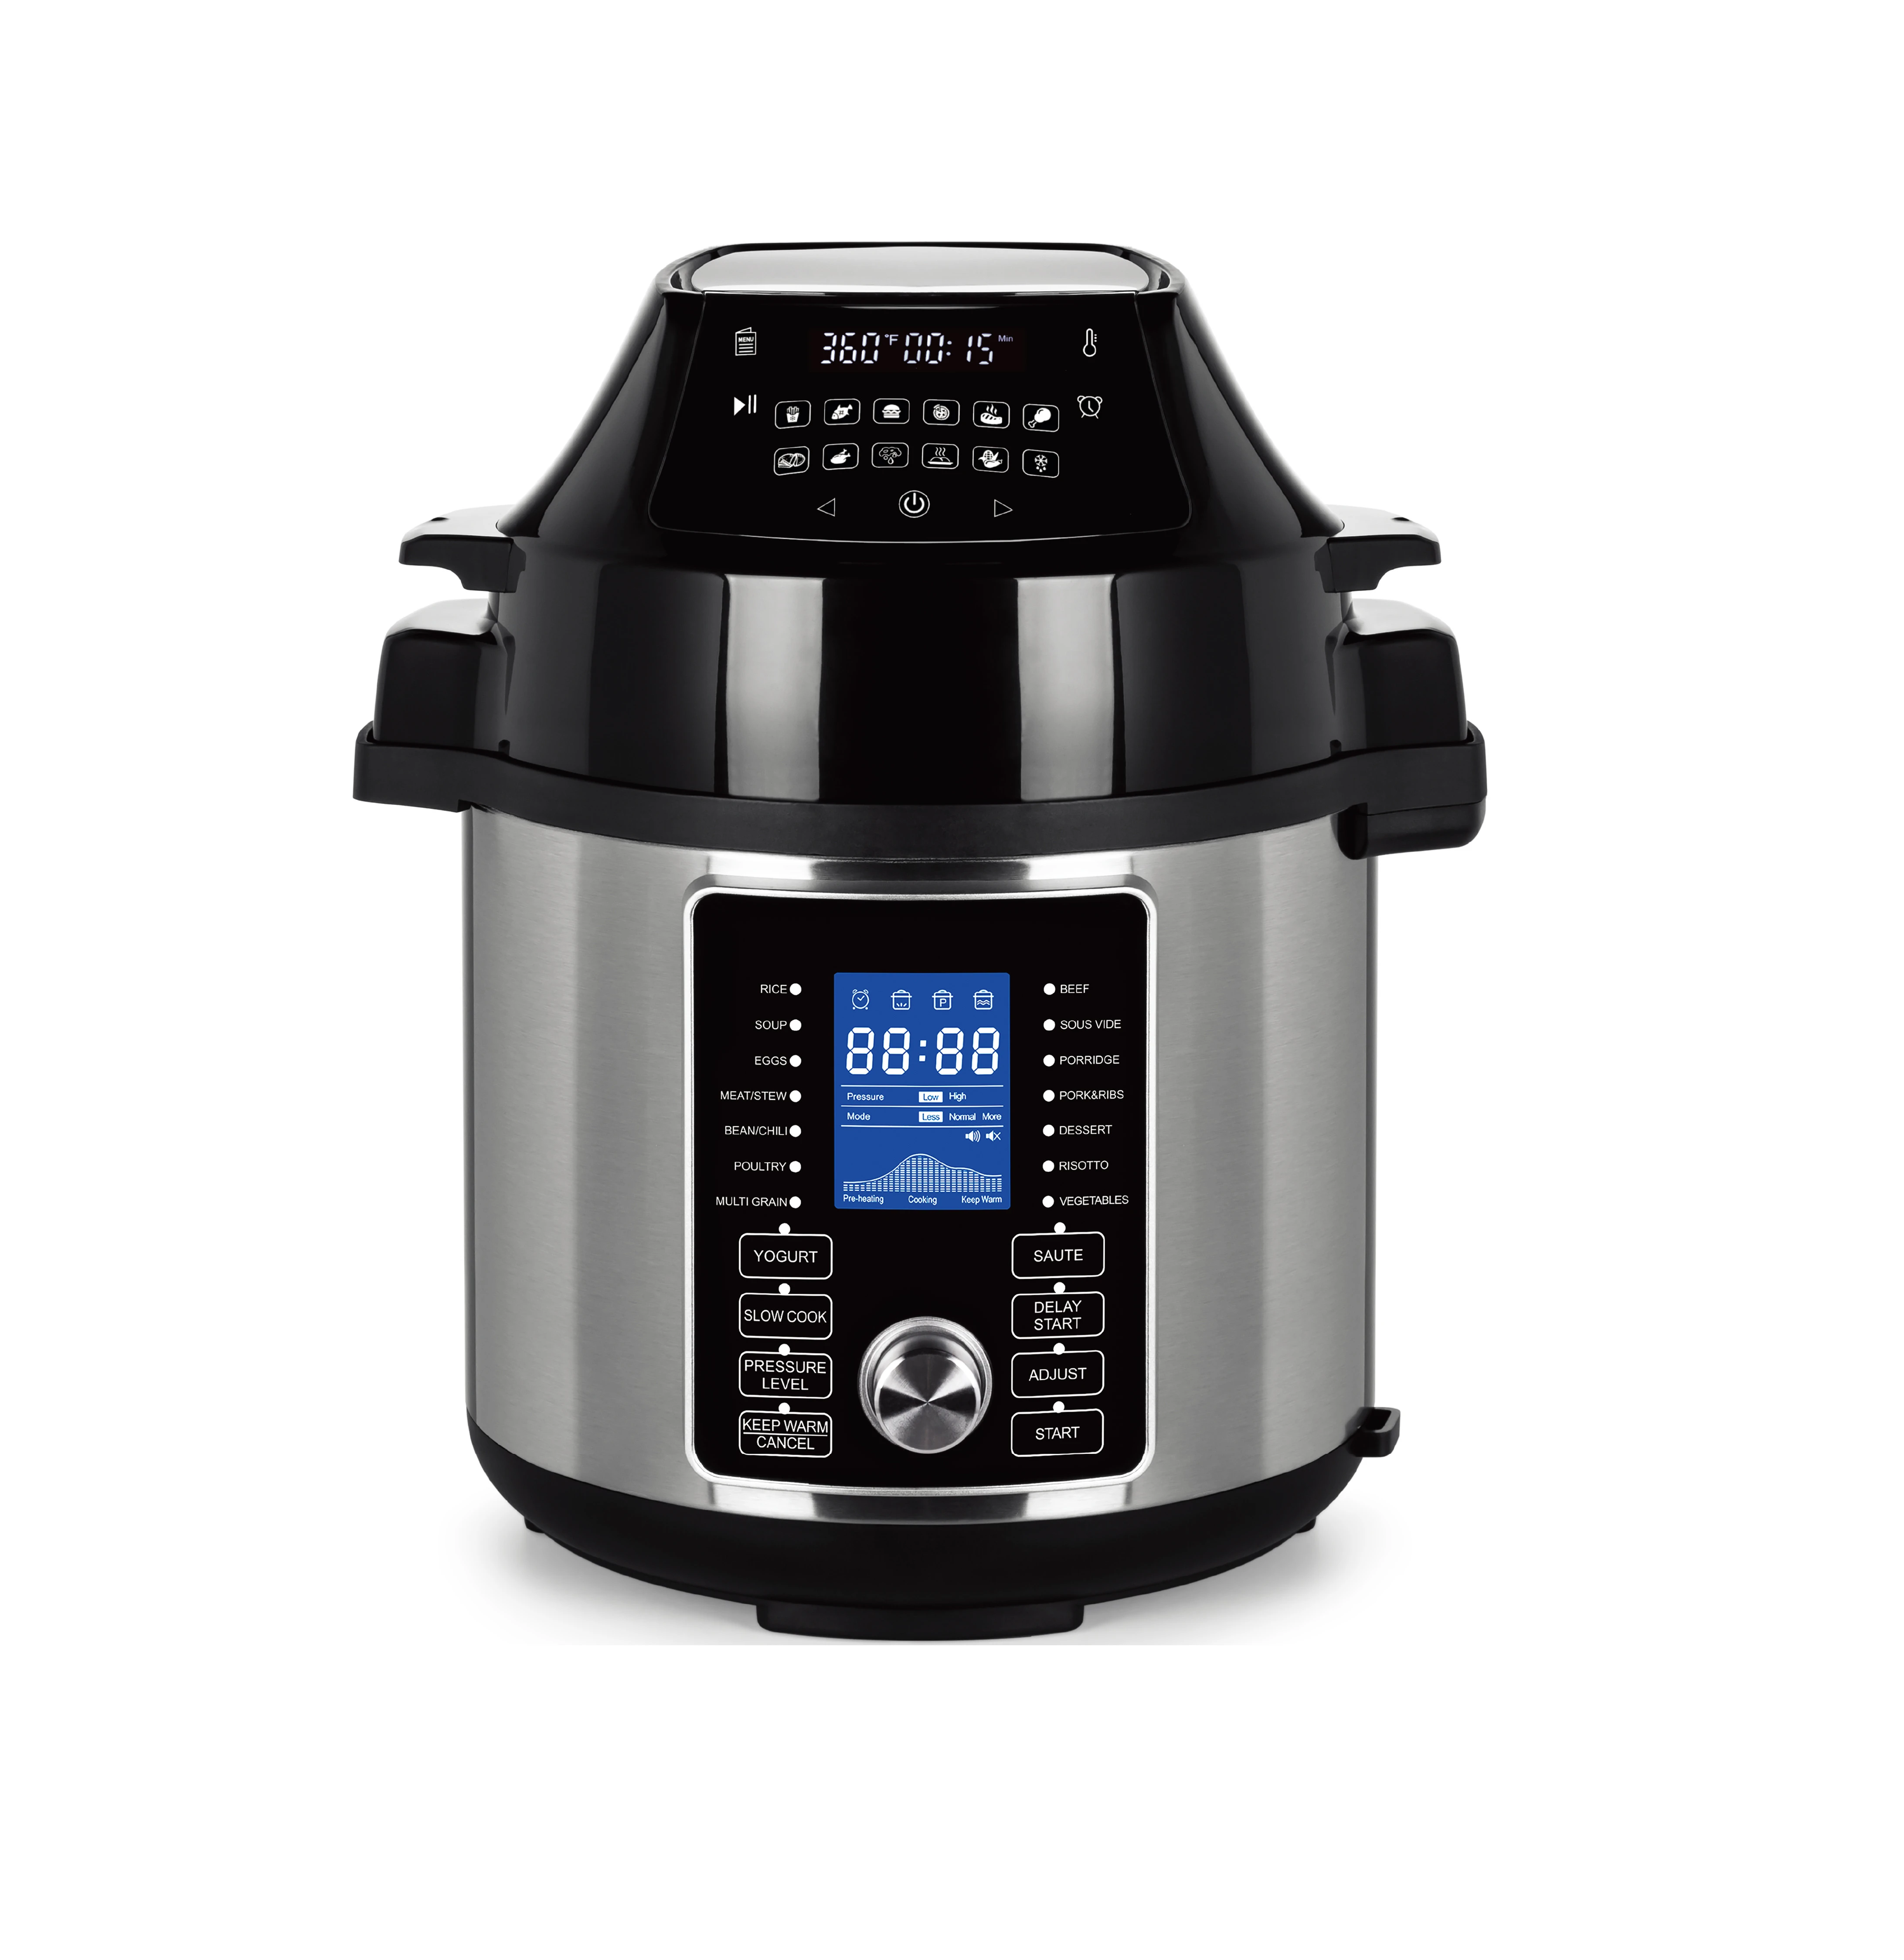 2 in 1 Electric presige pressure cooker stainless steel 6QT air fryer, Broil, Dehydrate, Slow Cooker